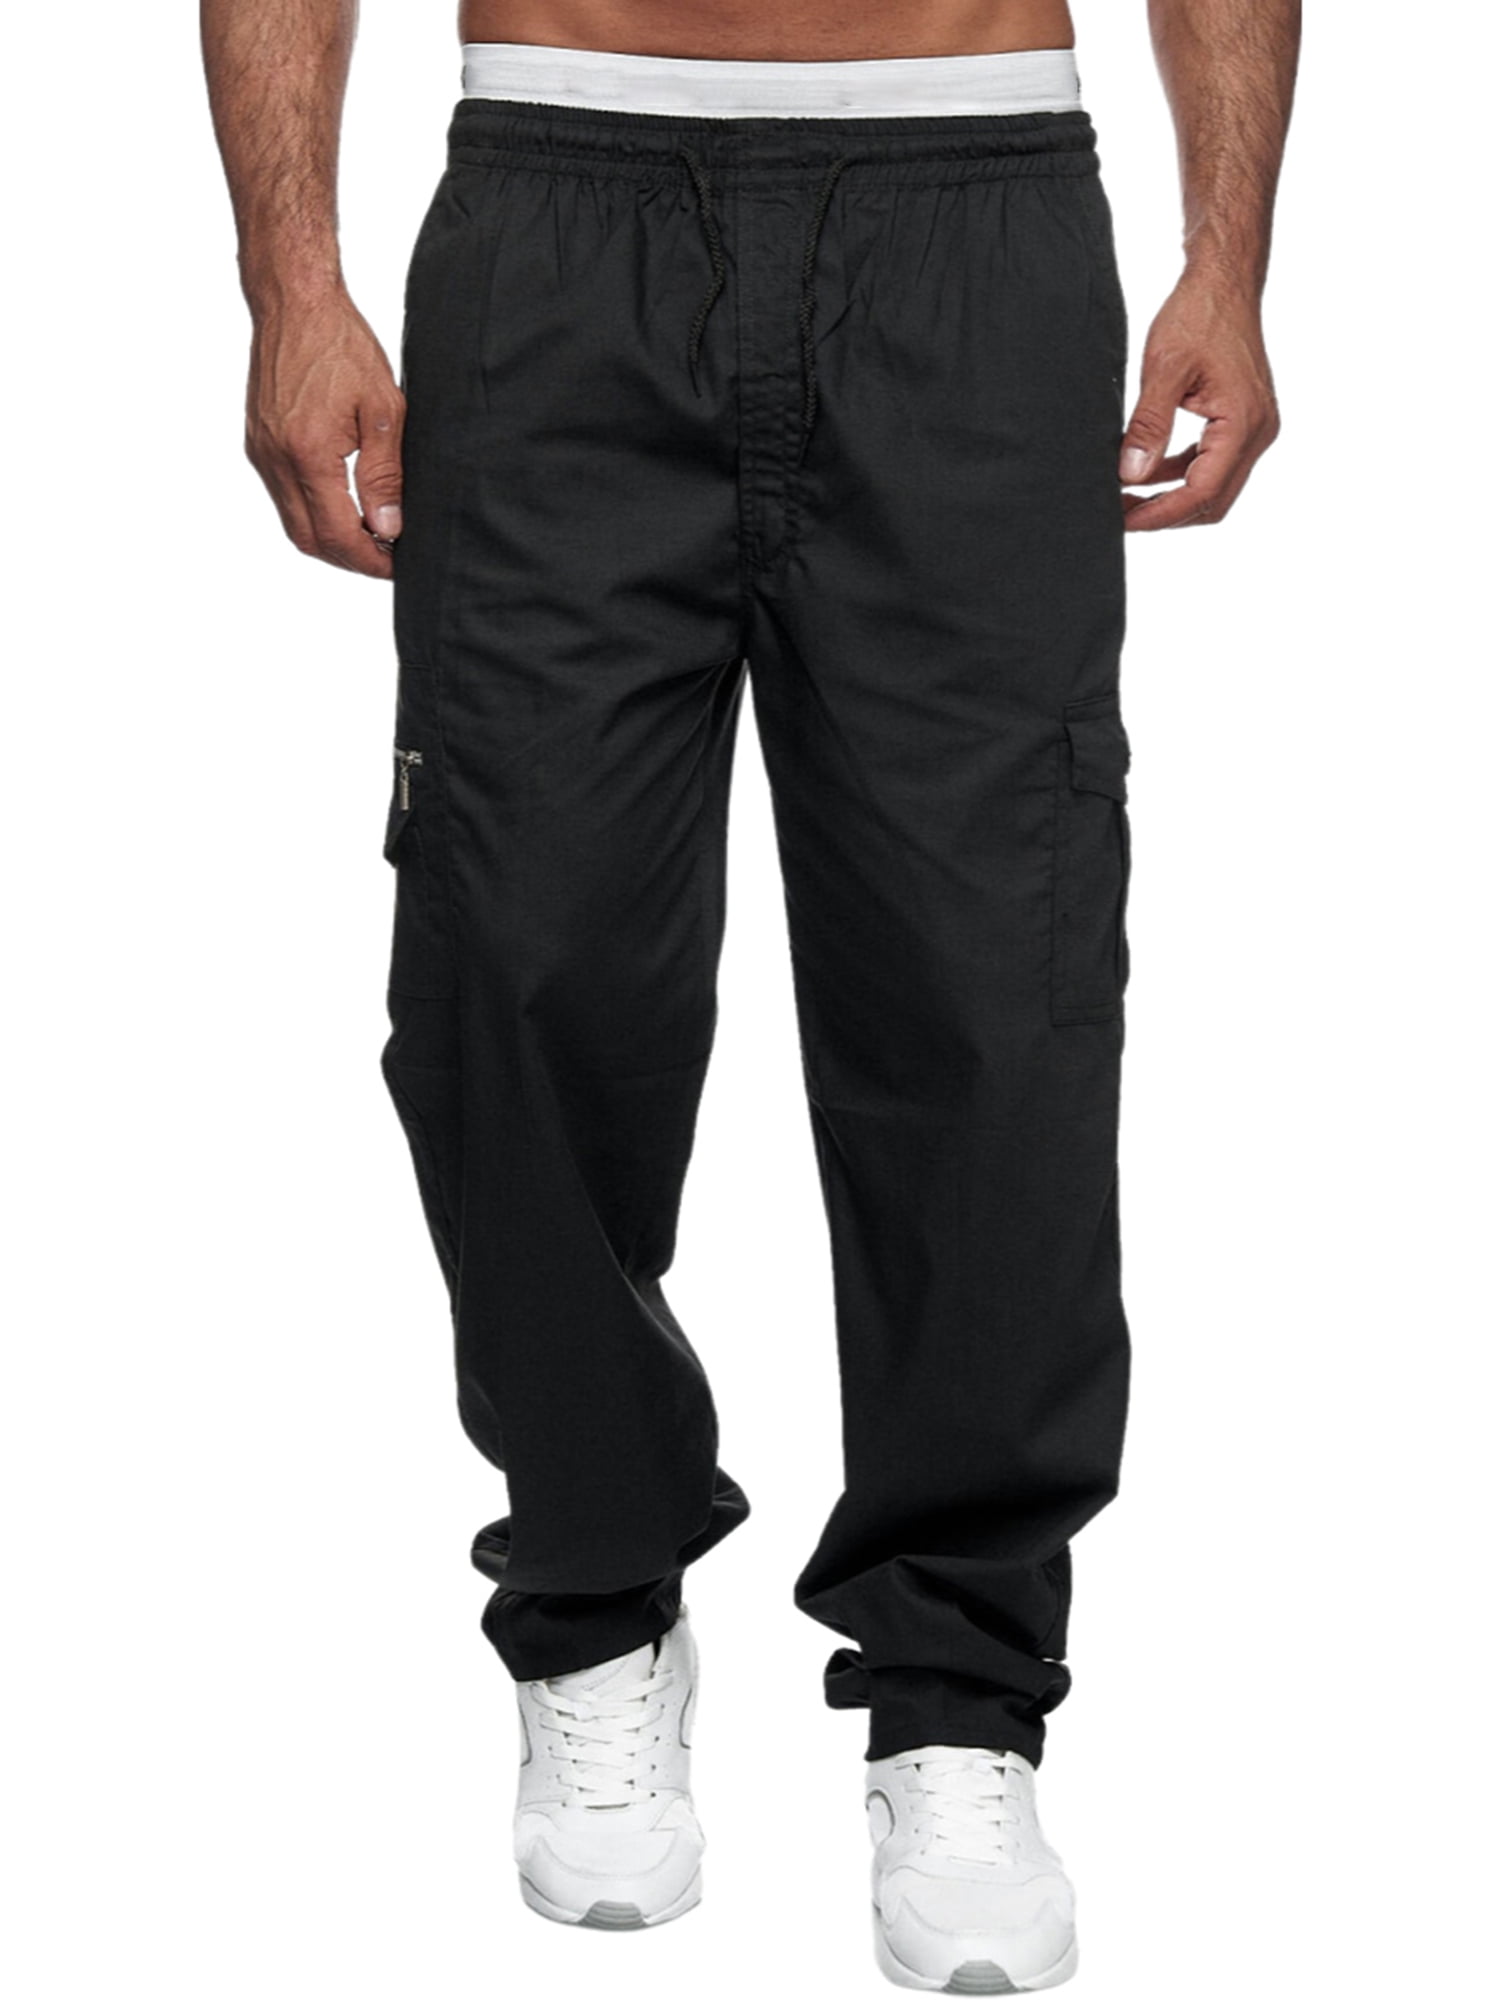 Mens Plain Casual Silky Jogger Gym Bottoms/Trousers Black Or Navy Size S-6XL 